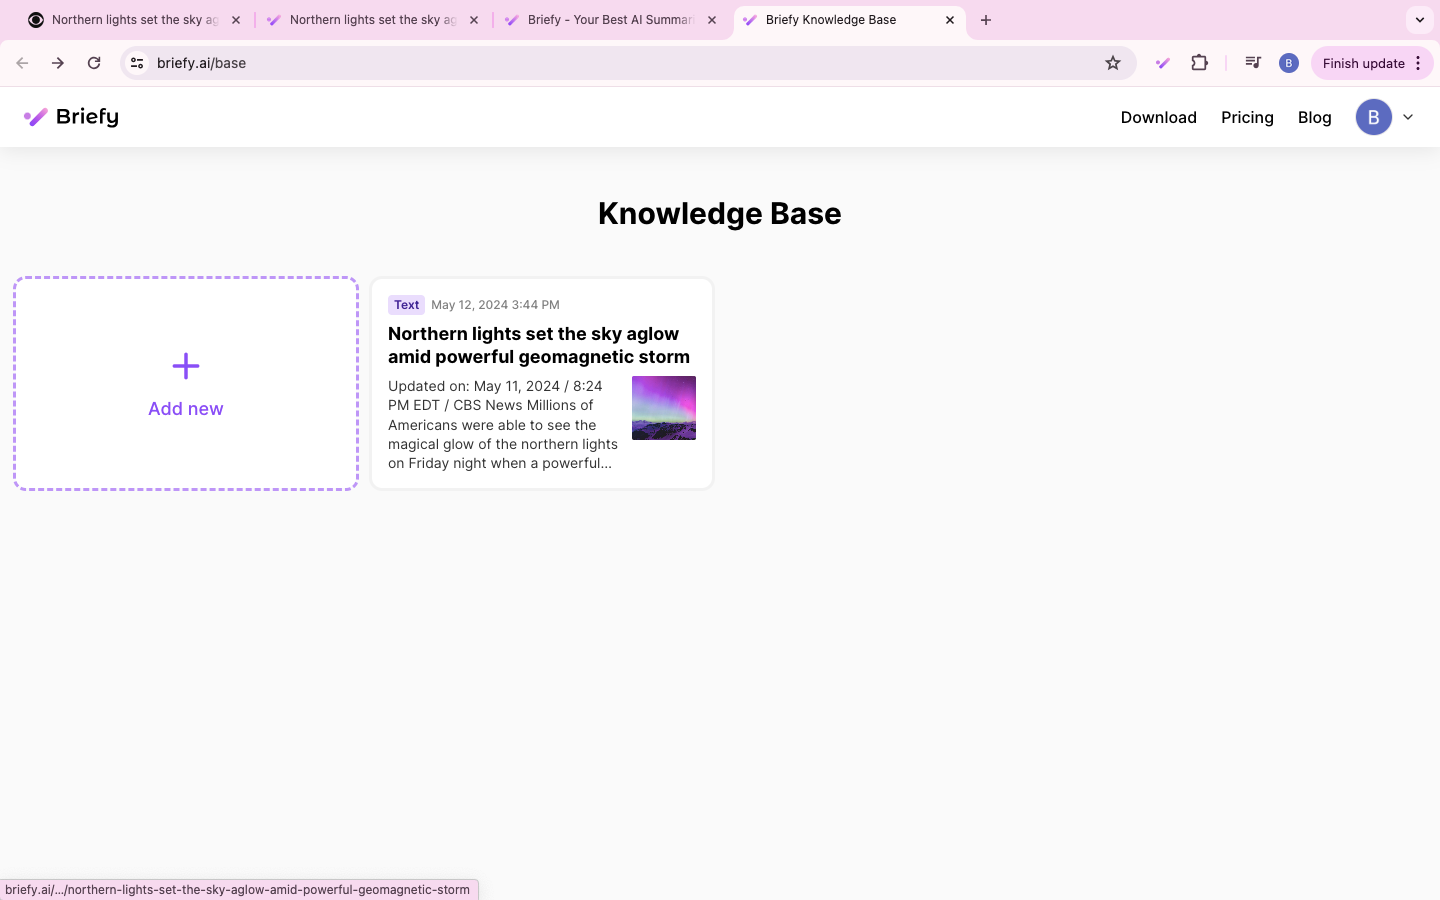 📣 Briefy 2.0.0: Knowledge Base, summary sharing, and more!